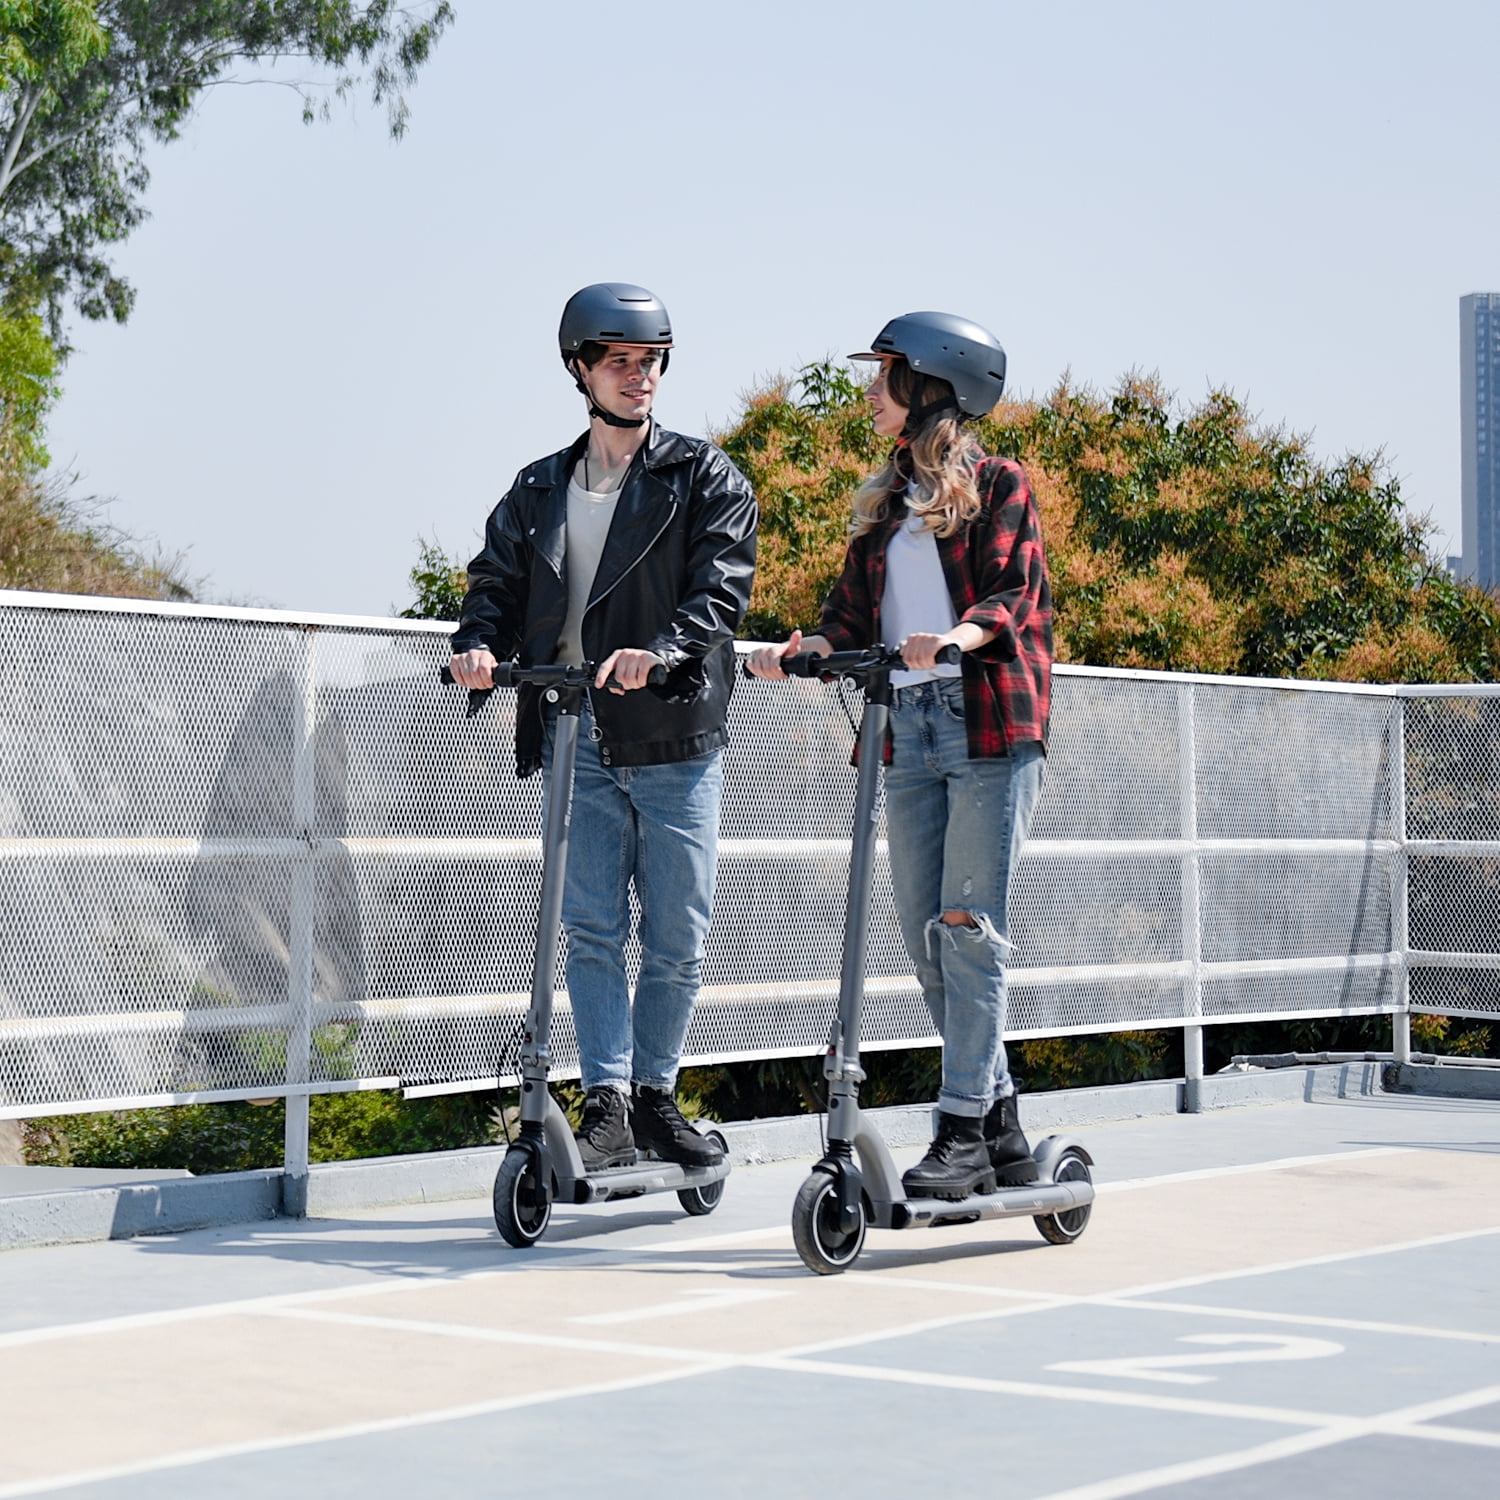 Electric Scooter - 5TH WHEEL M2 Electric Scooter Adults, 8.5″ Honeycomb Tire,  19 Miles Long Range & 15.5 Mph, Triple Brakes & Cushioning, Foldable with  Night Light Sport Scooters 220lbs Max Load 